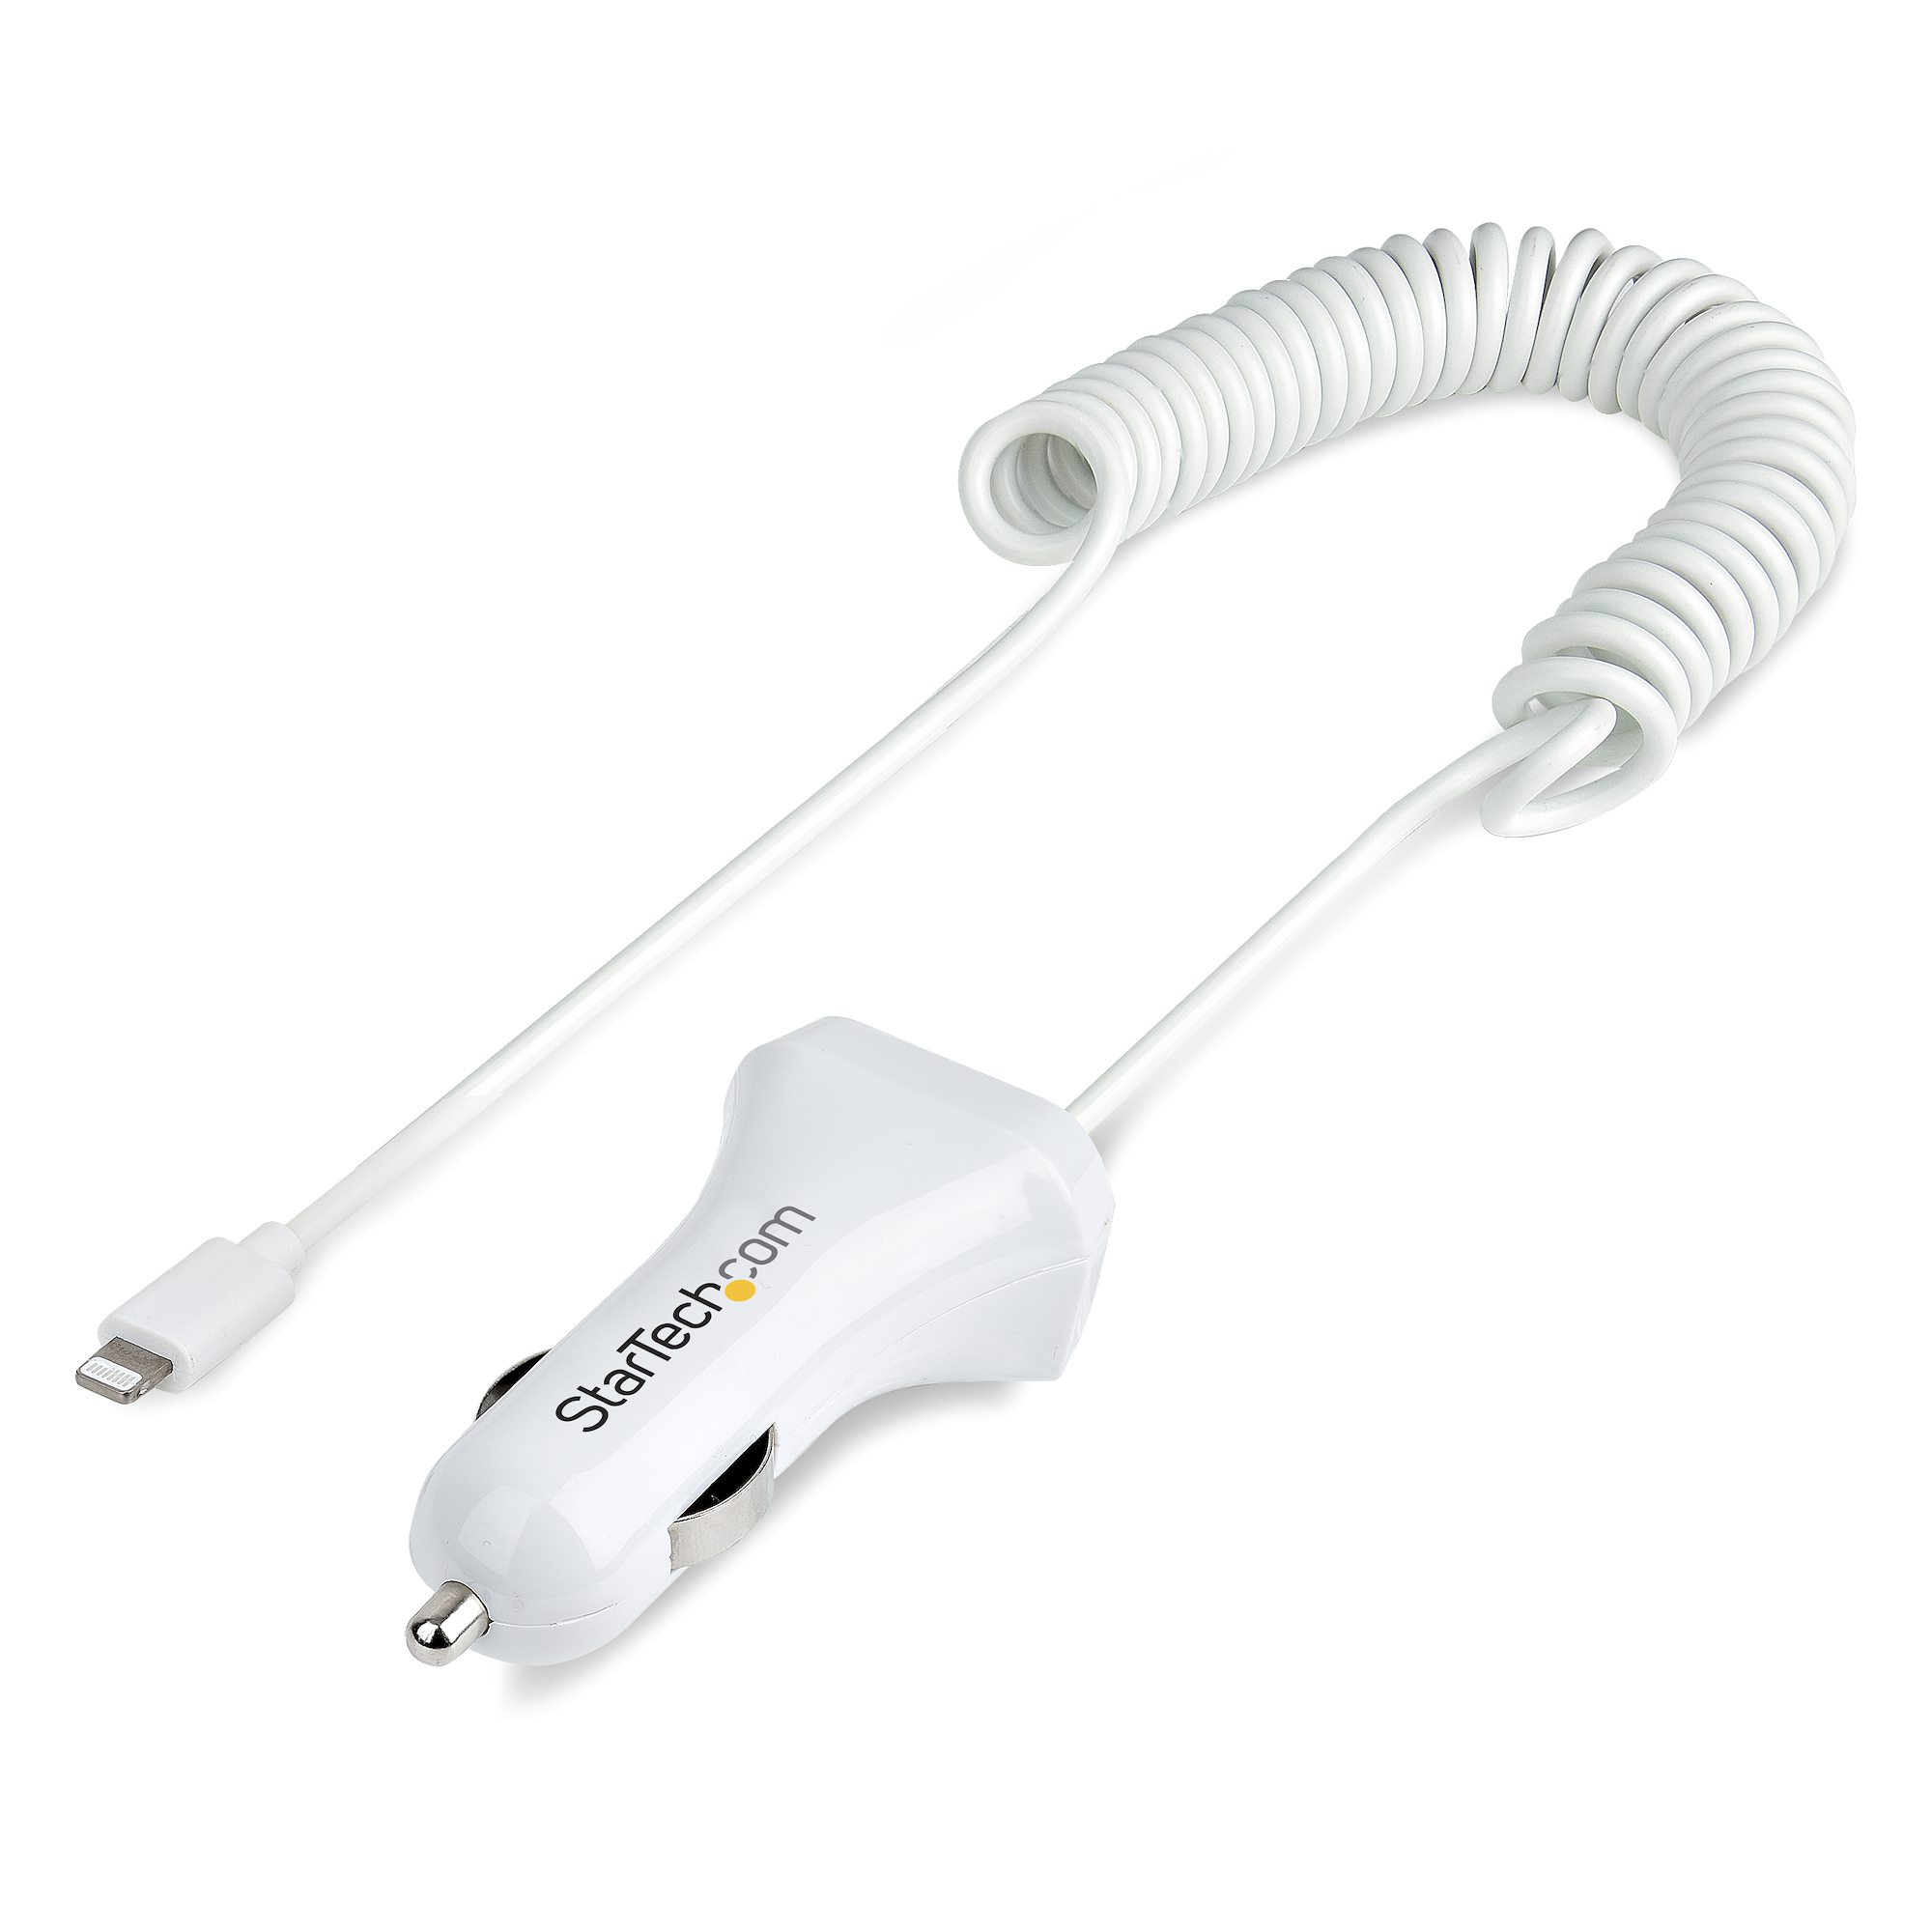 CHARGEUR ALLUME CIGARE MFI LIGHTNING INTEGRE / 2.4A 1M BLANC